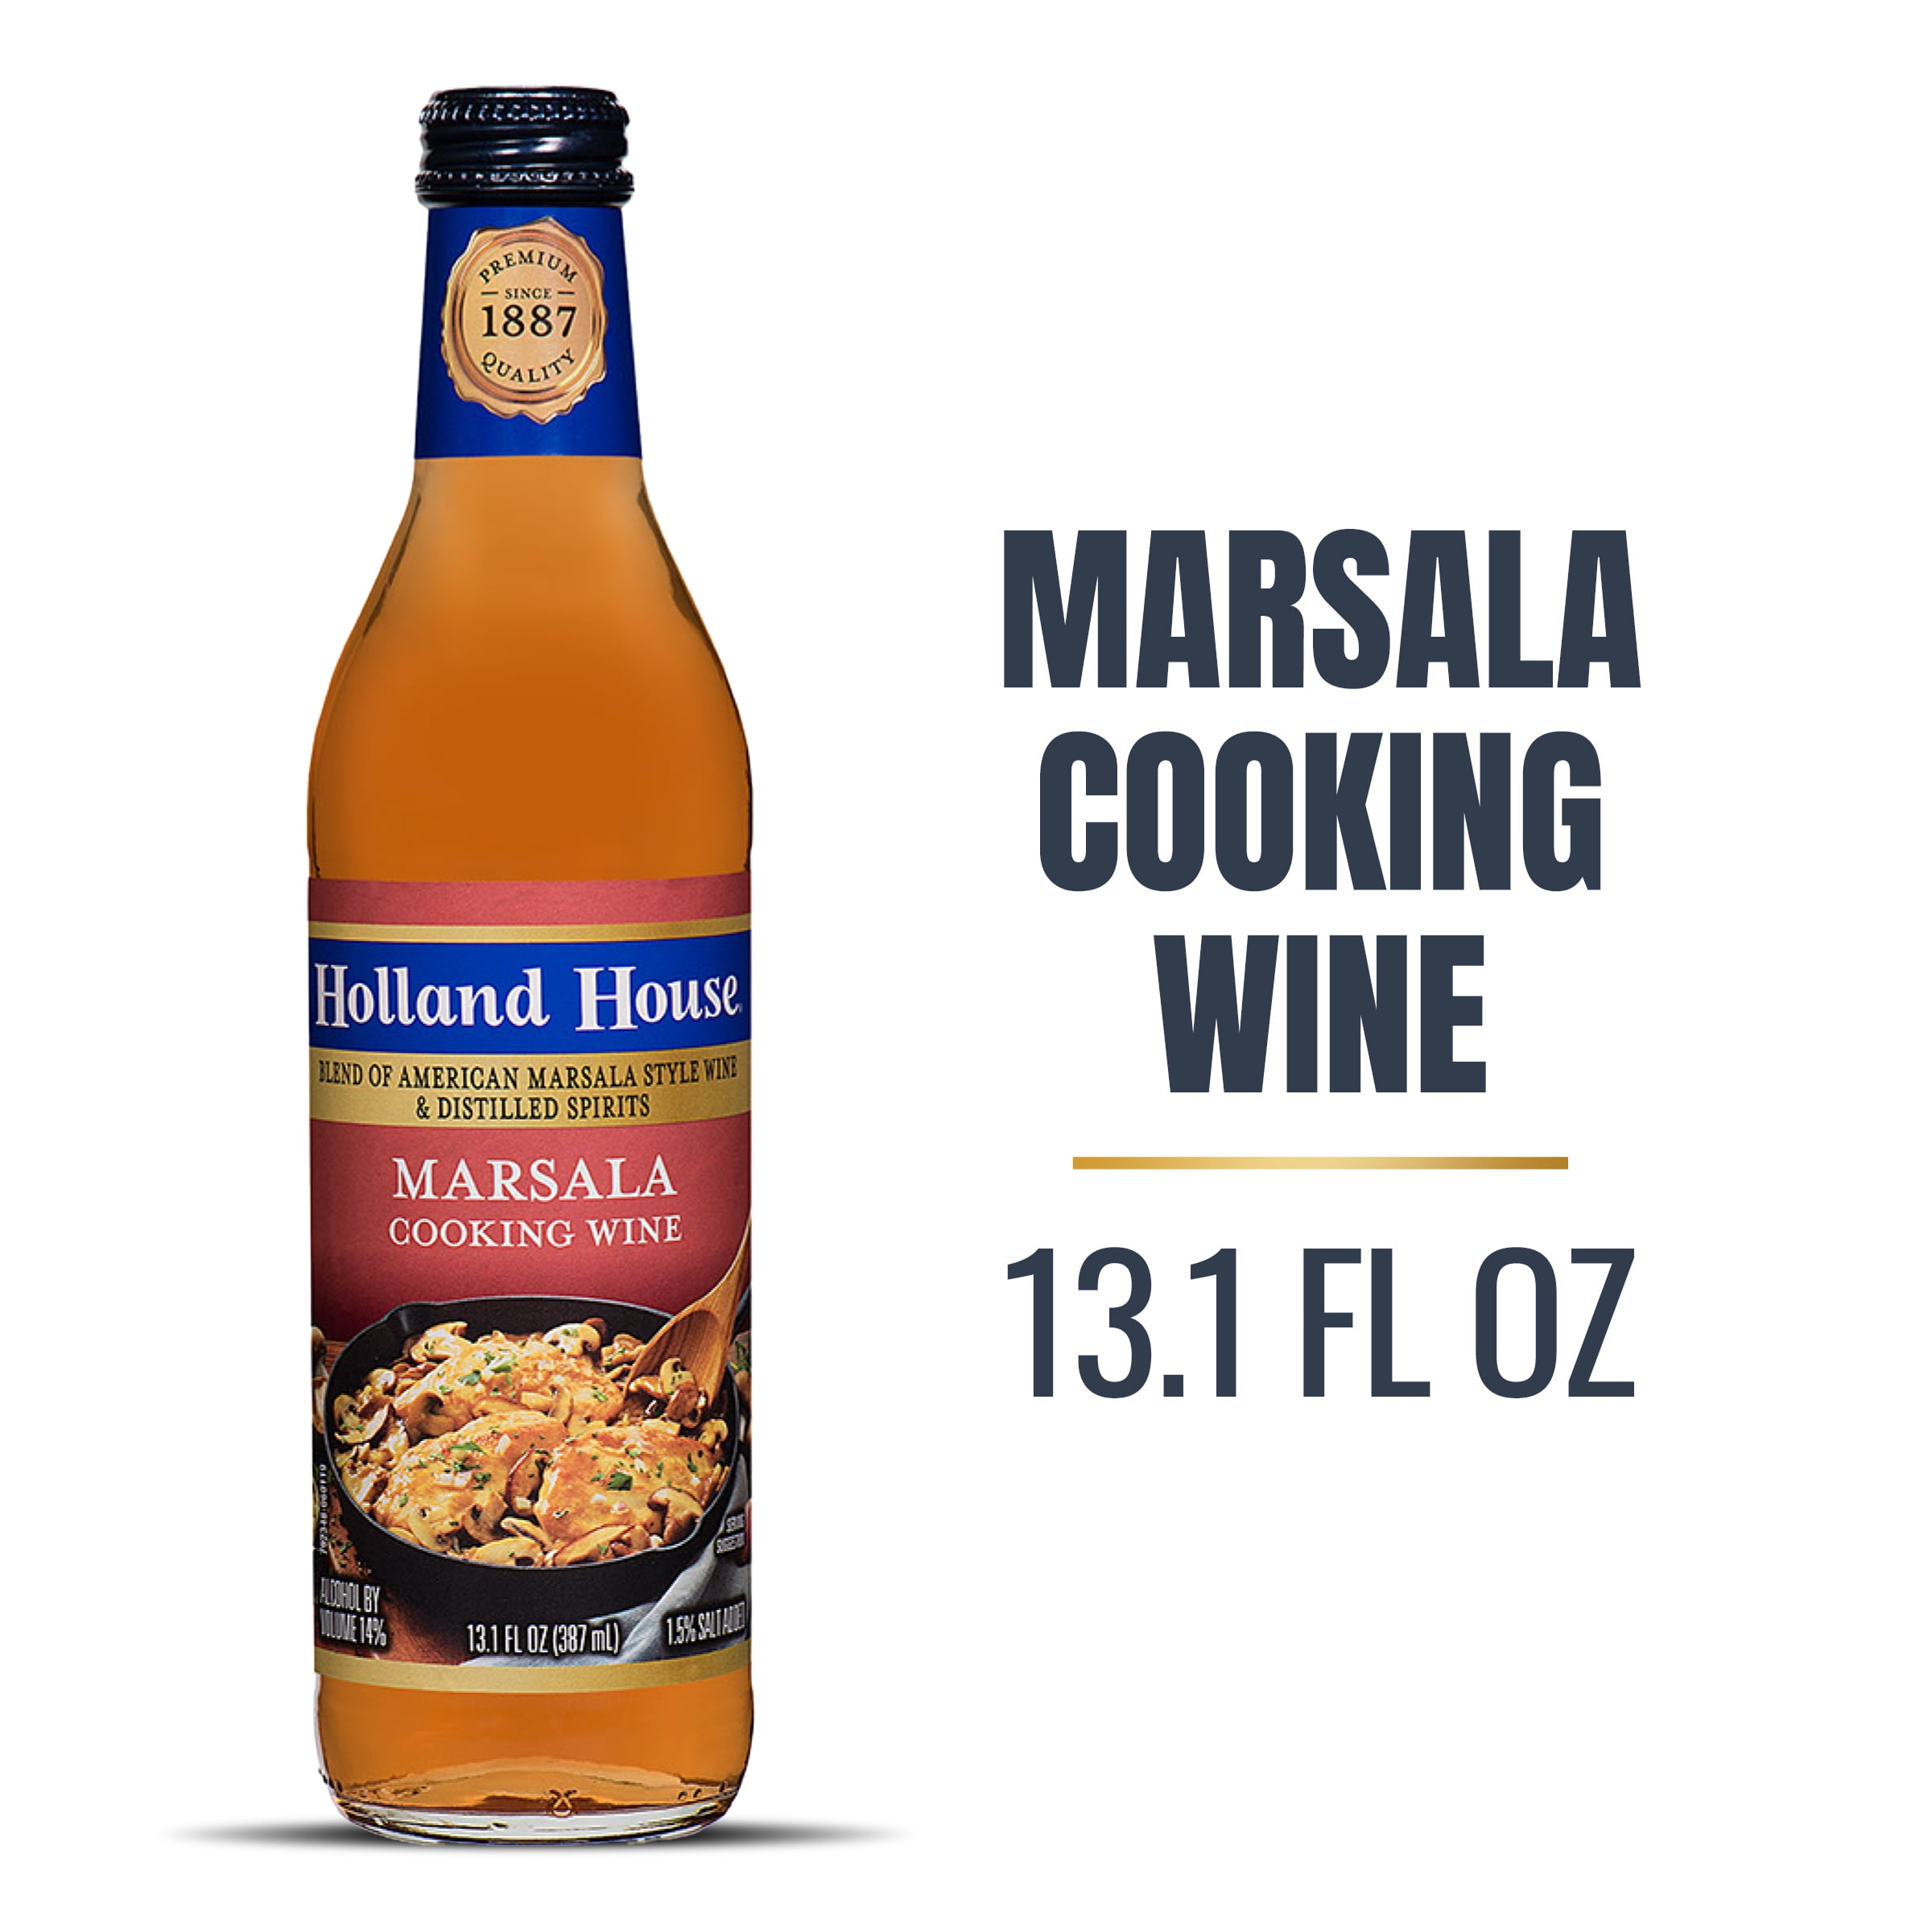 Holland House Marsala Cooking Wine, Ideal for Cooking, Roasting and Marinating, 13 FL OZ